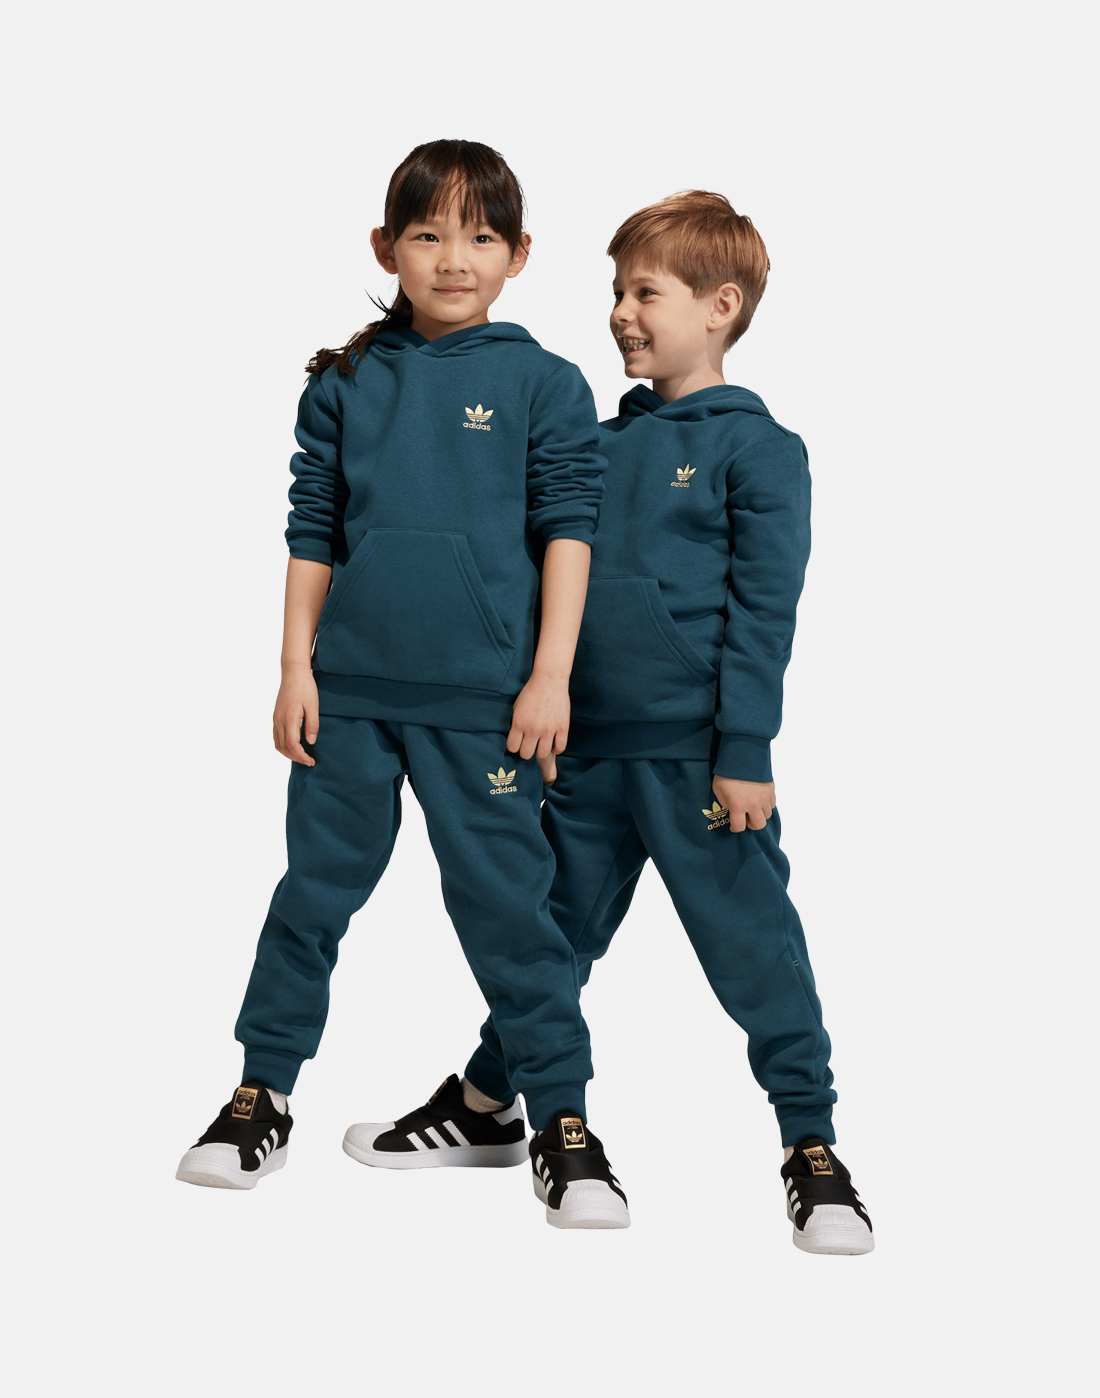 adidas Originals Younger Boys Crew Set - Green | Life Style Sports IE